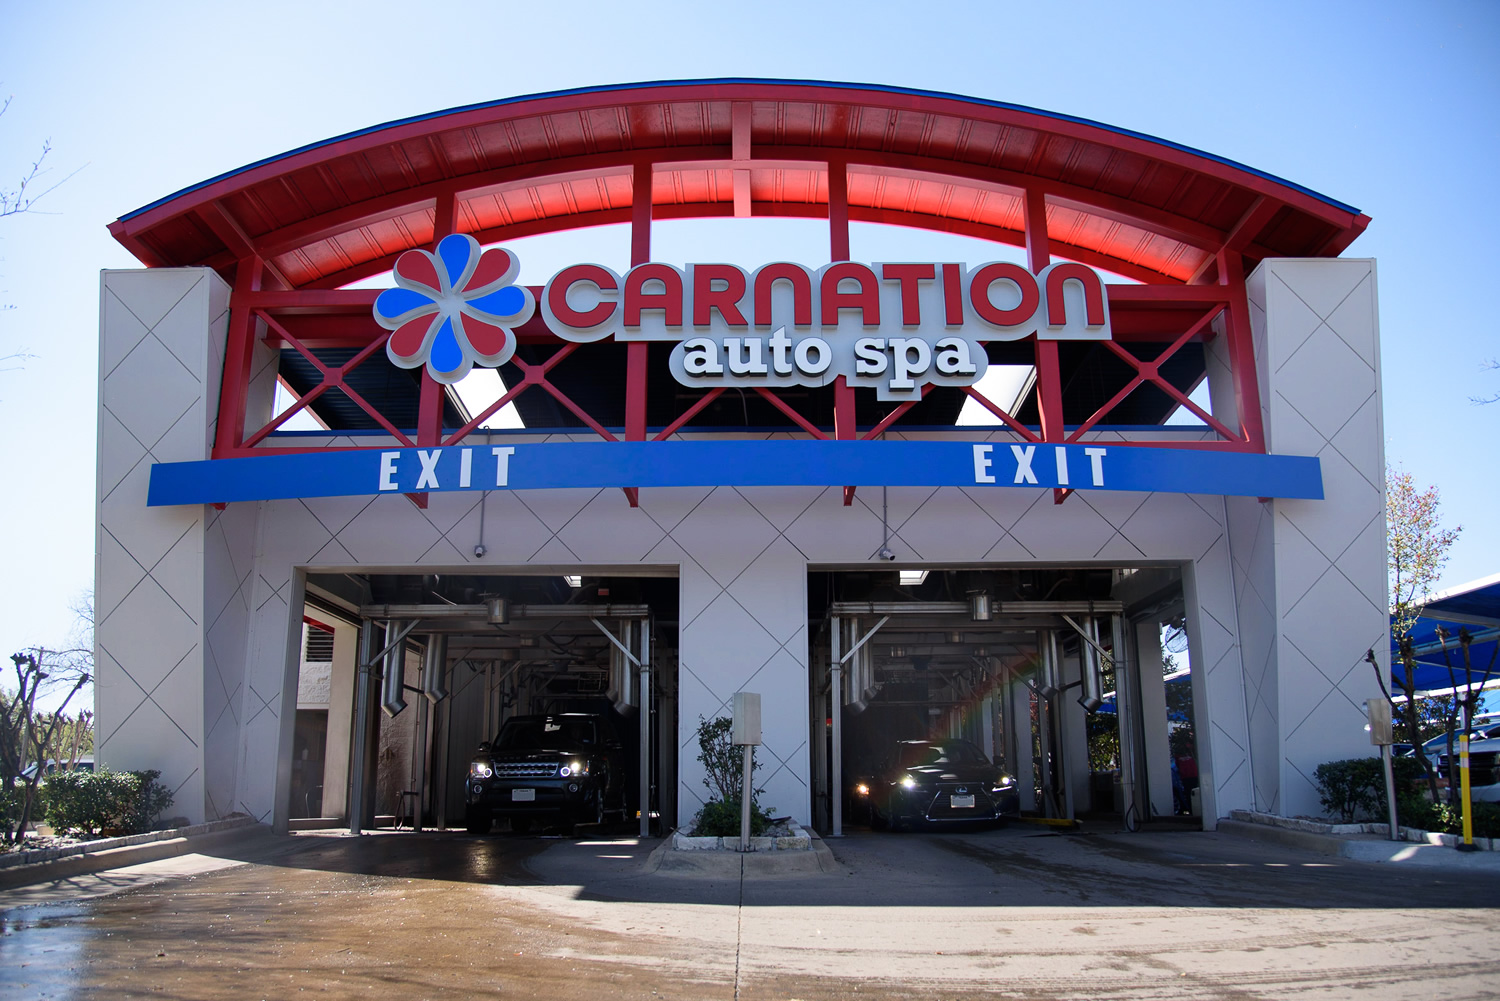 dallas investment firms - Carnation Auto Spa exit